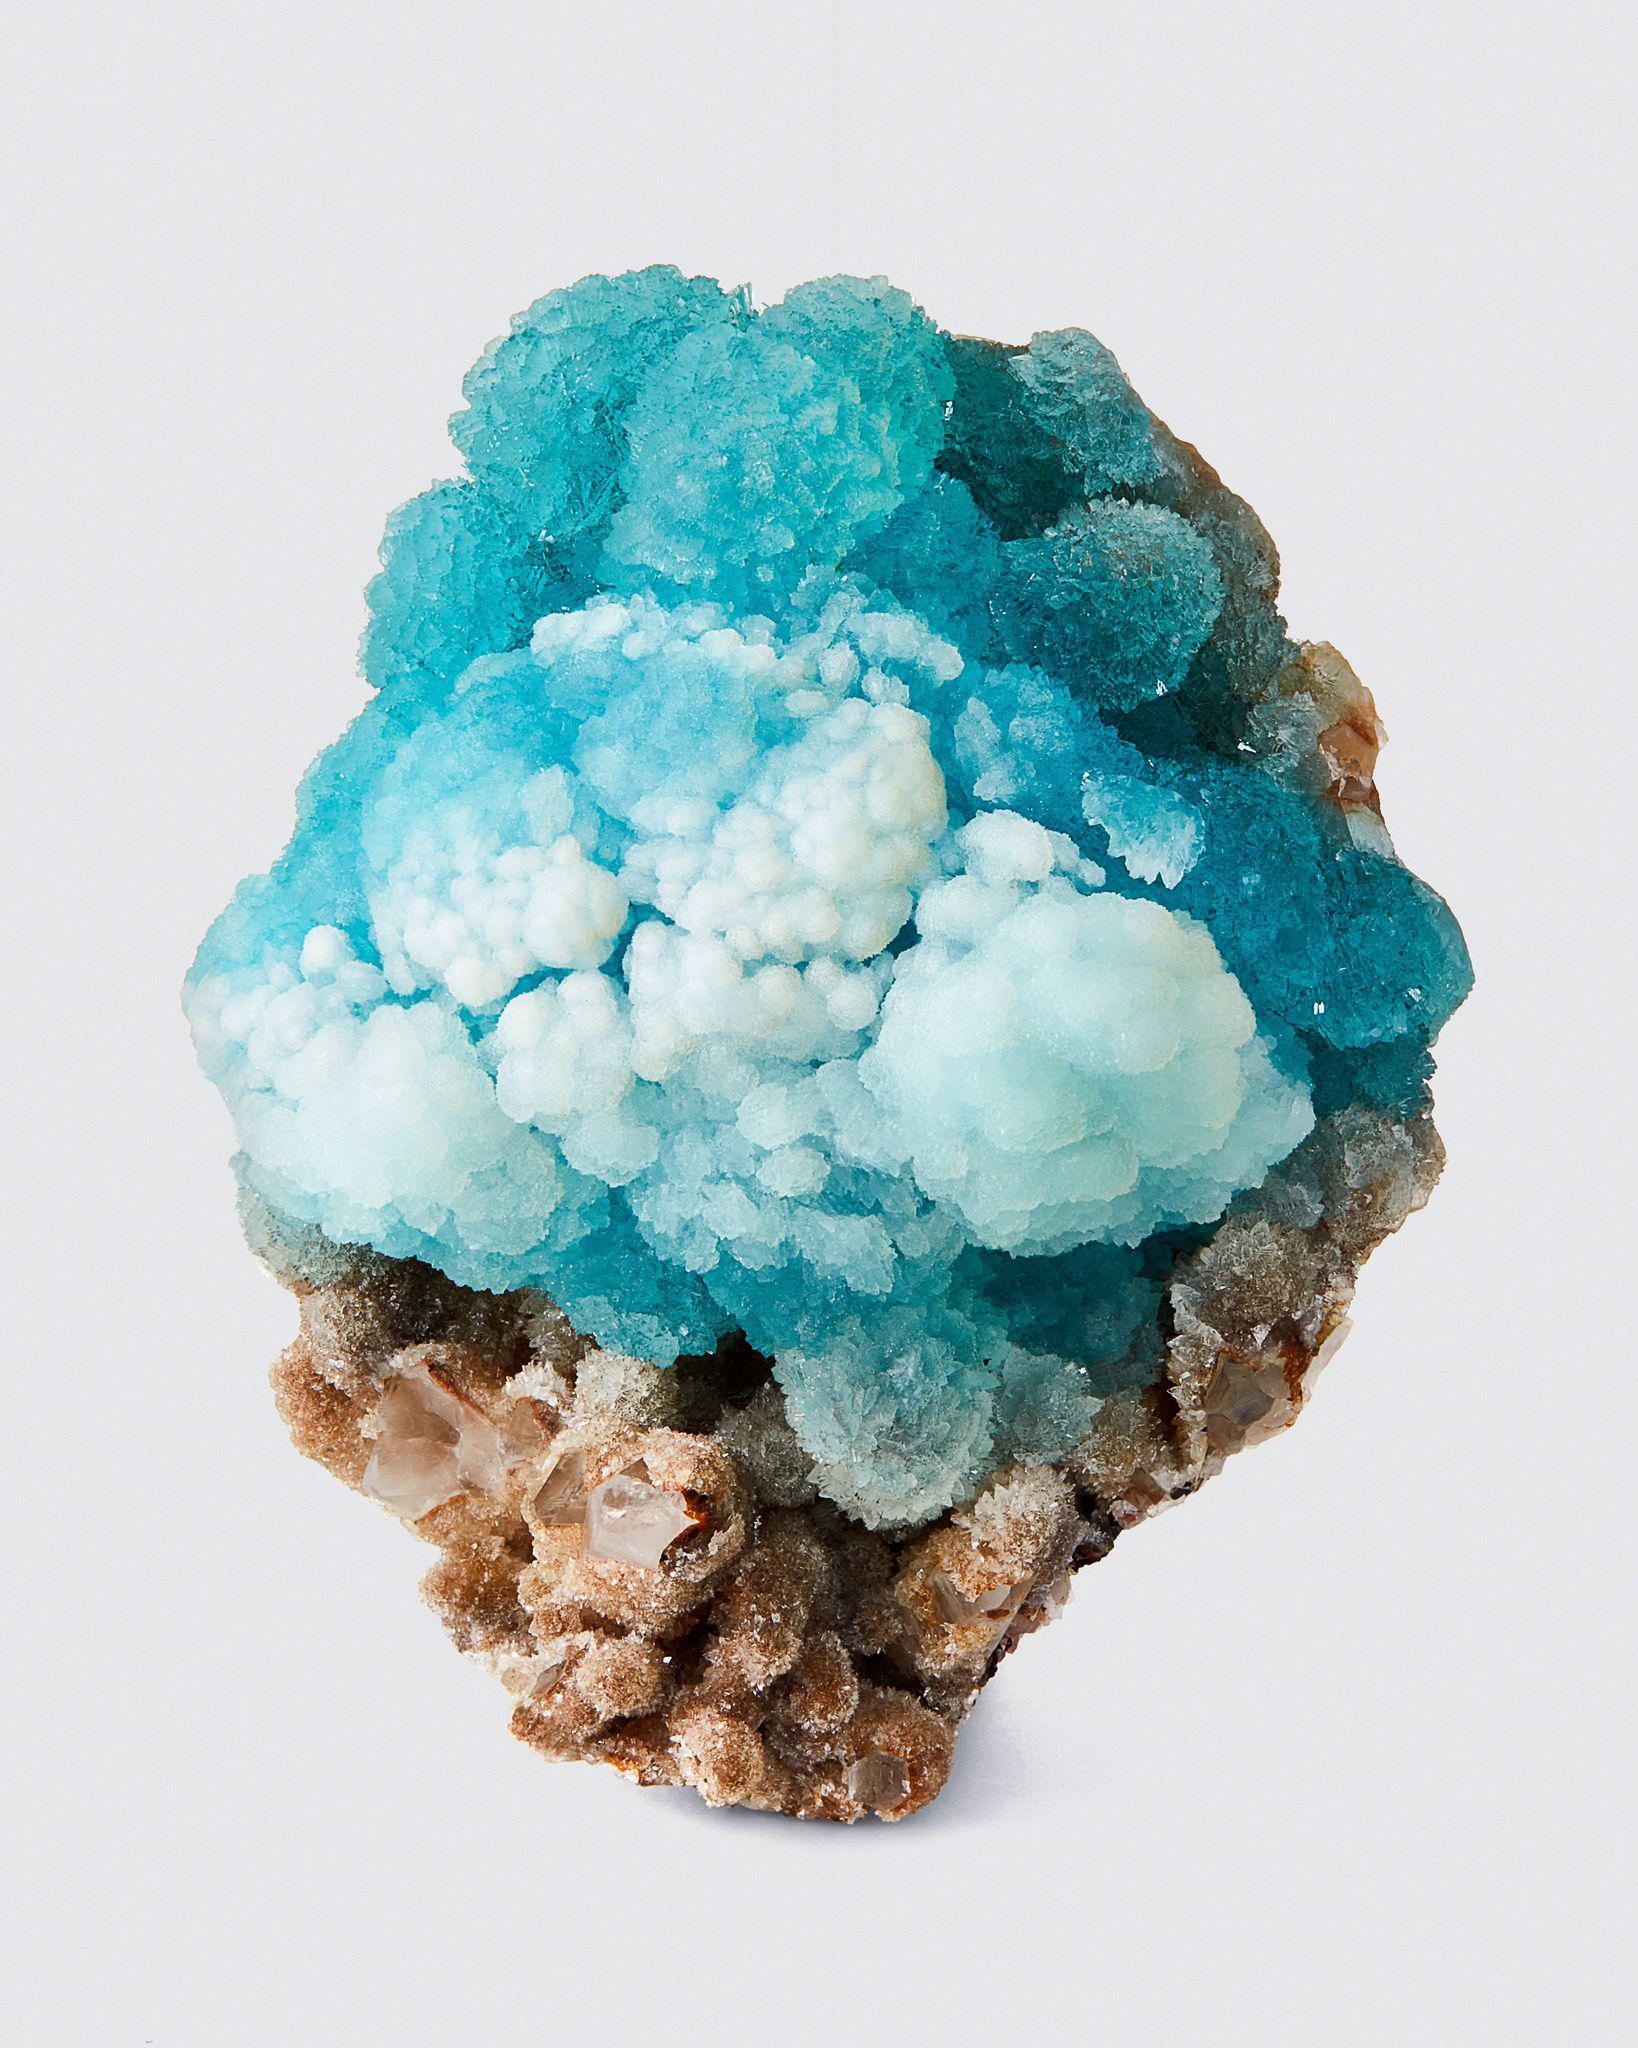 Hemimorphite on Quartz, Malipo Mine, Wenshan Co., Yunnan Prov., China
Measures: 12 cm tall x 10 cm wide

Hemimorphite from China has taken on entirely new qualities that barely existed anywhere else on Earth. The intensity of color and the